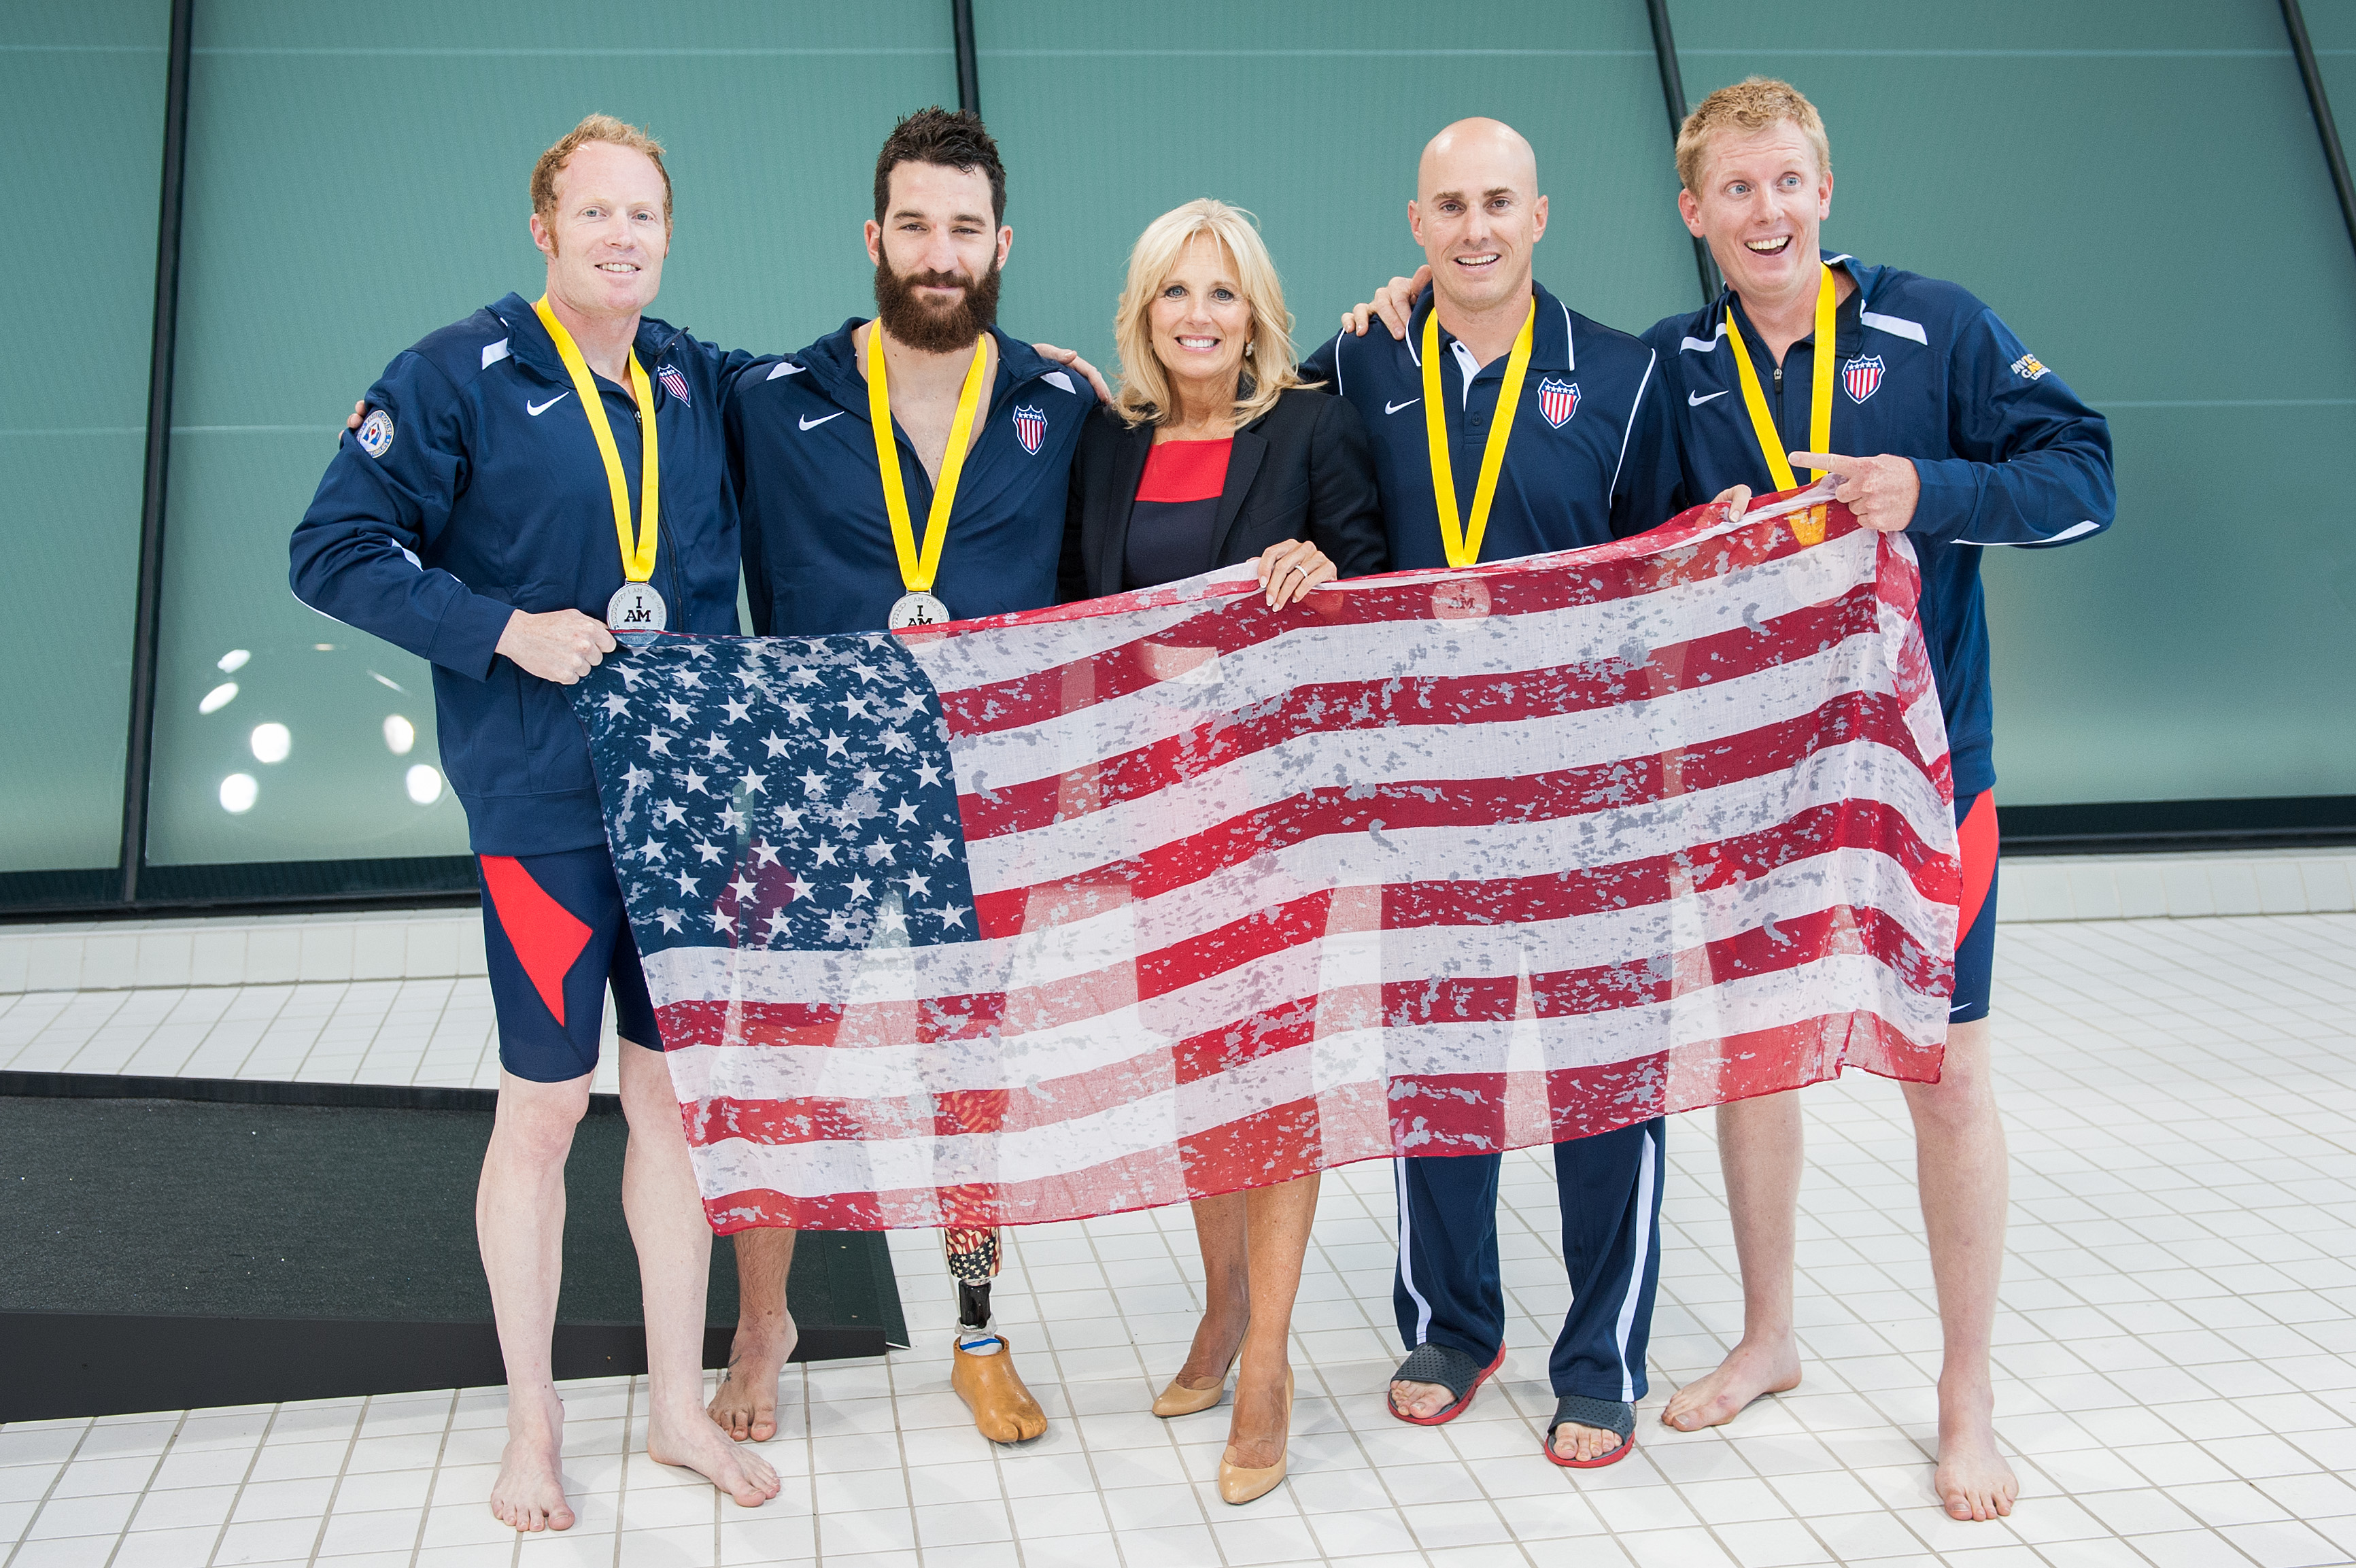 Dr. Jill Biden awards medals to US Team swimmers after winning the silver at the Invictus Games in London, UK, September 14, 2014. (Photo by James Pan, State Department)